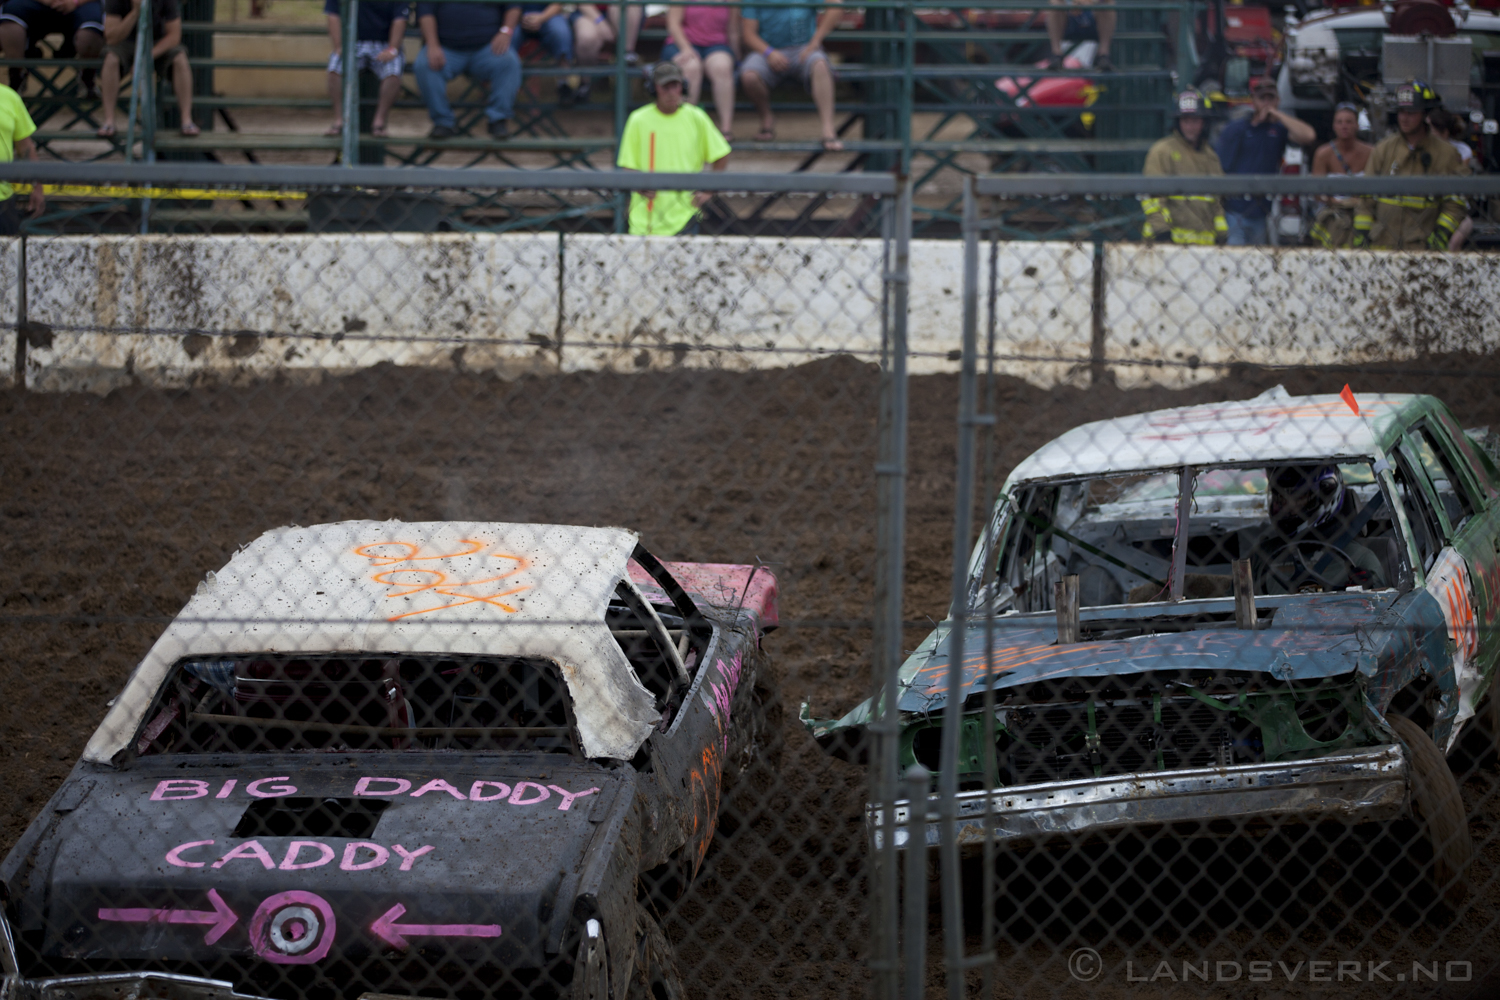 Demolition Derby @ Noble County Fair, Indiana. 

(Canon EOS 5D Mark II / Canon EF 70-200mm f/2.8 L IS II USM)